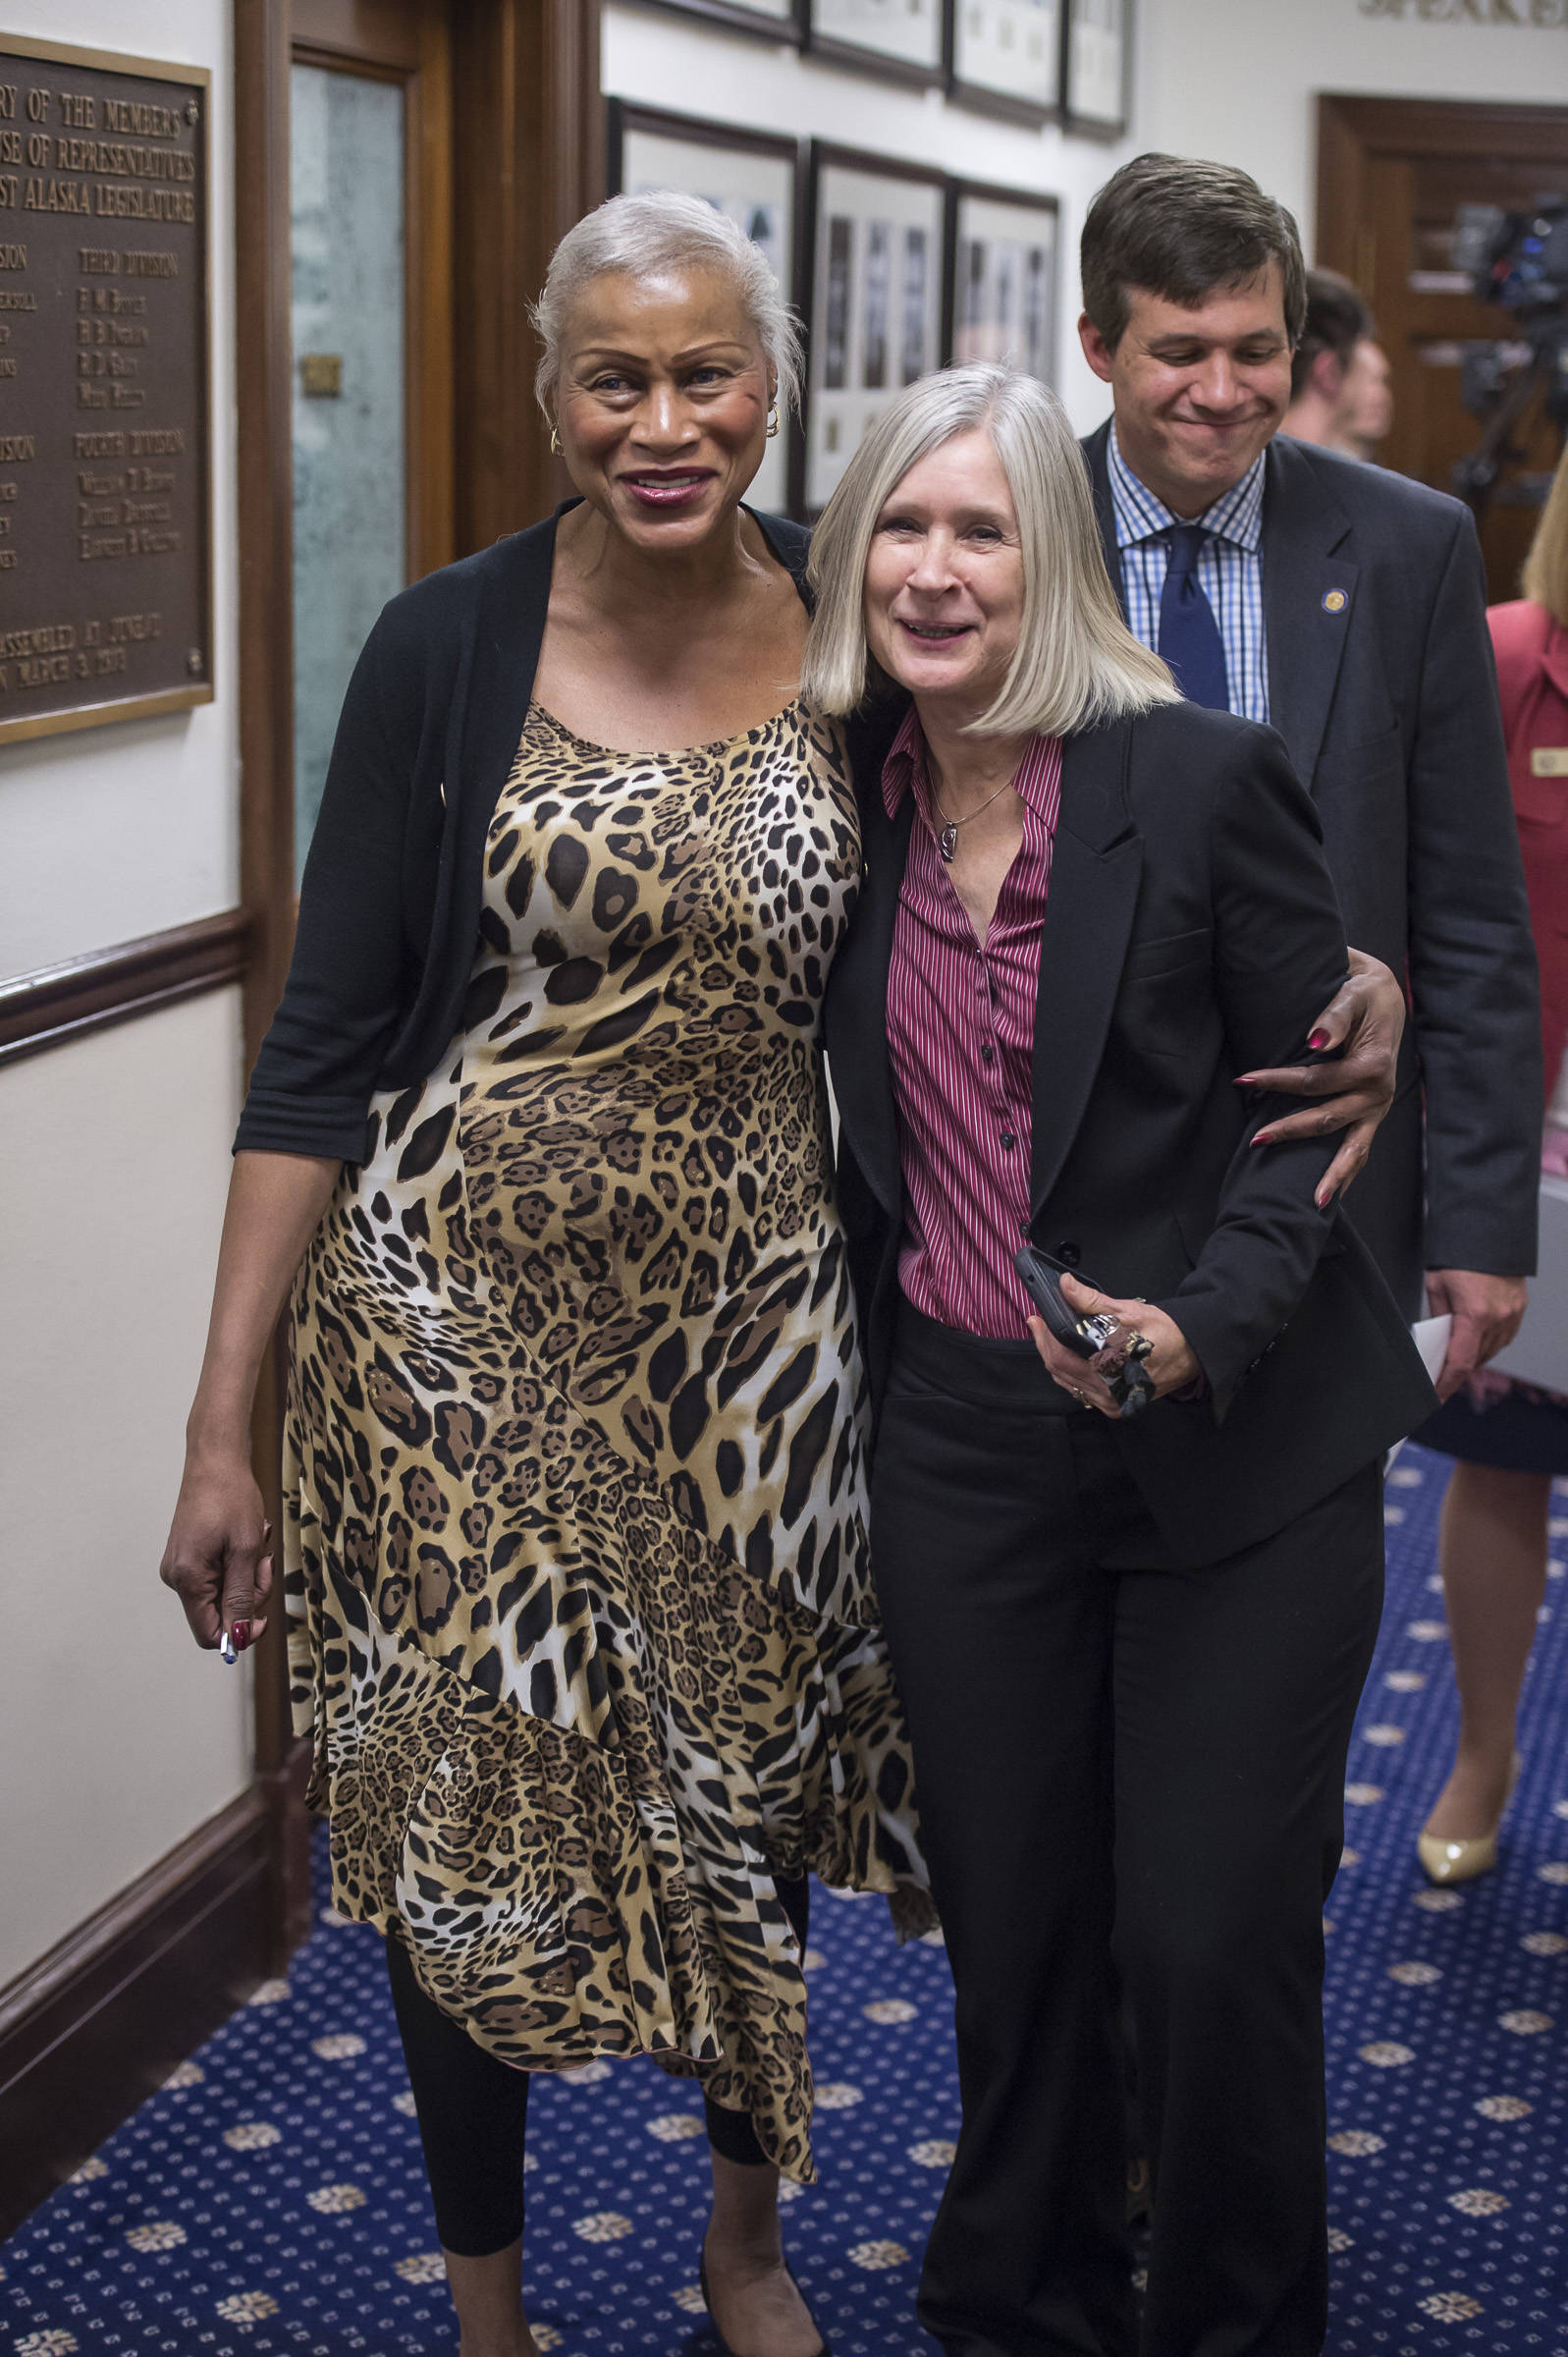 Sen. Elvi Gray-Jackson, D-Anchorage, Rep. Andi Story, D-Juneau, and Sen. Bill Wielechowski, D-Anchorage, arrive to listen to Gov. Mike Dunleavy give his State of the State speech at the Capitol on Tuesday, Jan. 22, 2019. (Michael Penn | Juneau Empire)